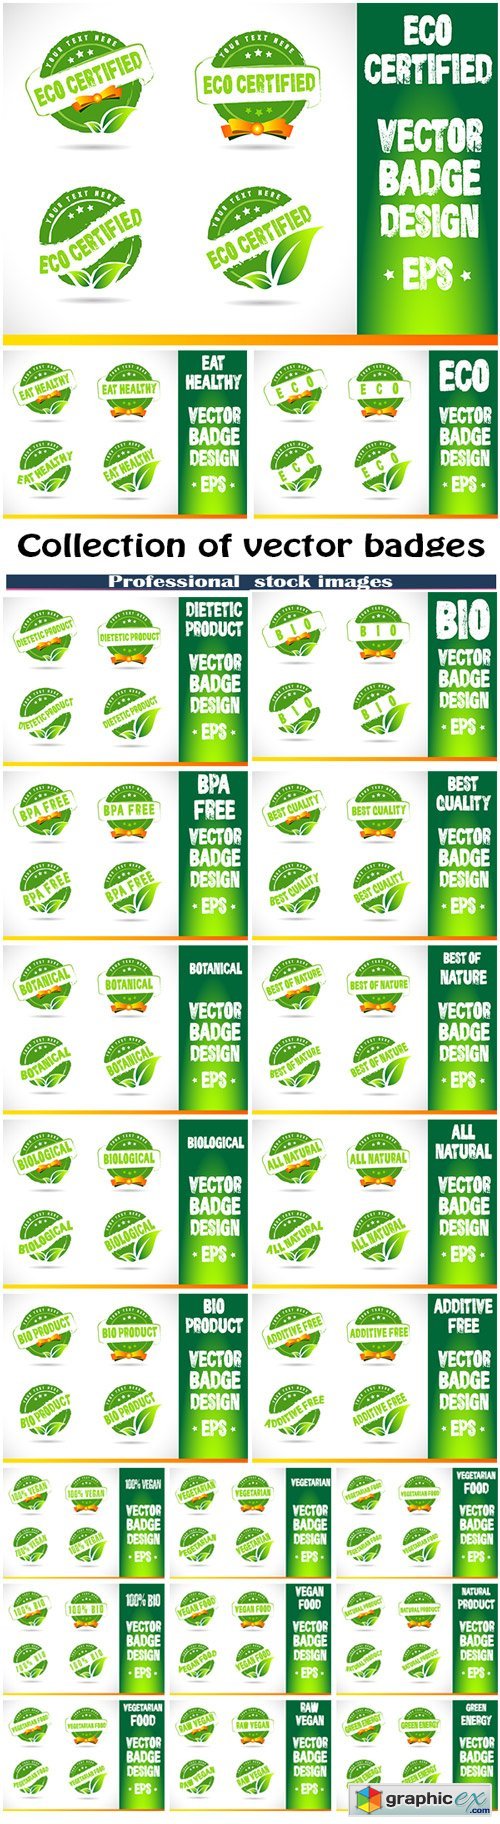 Collection of vector badges